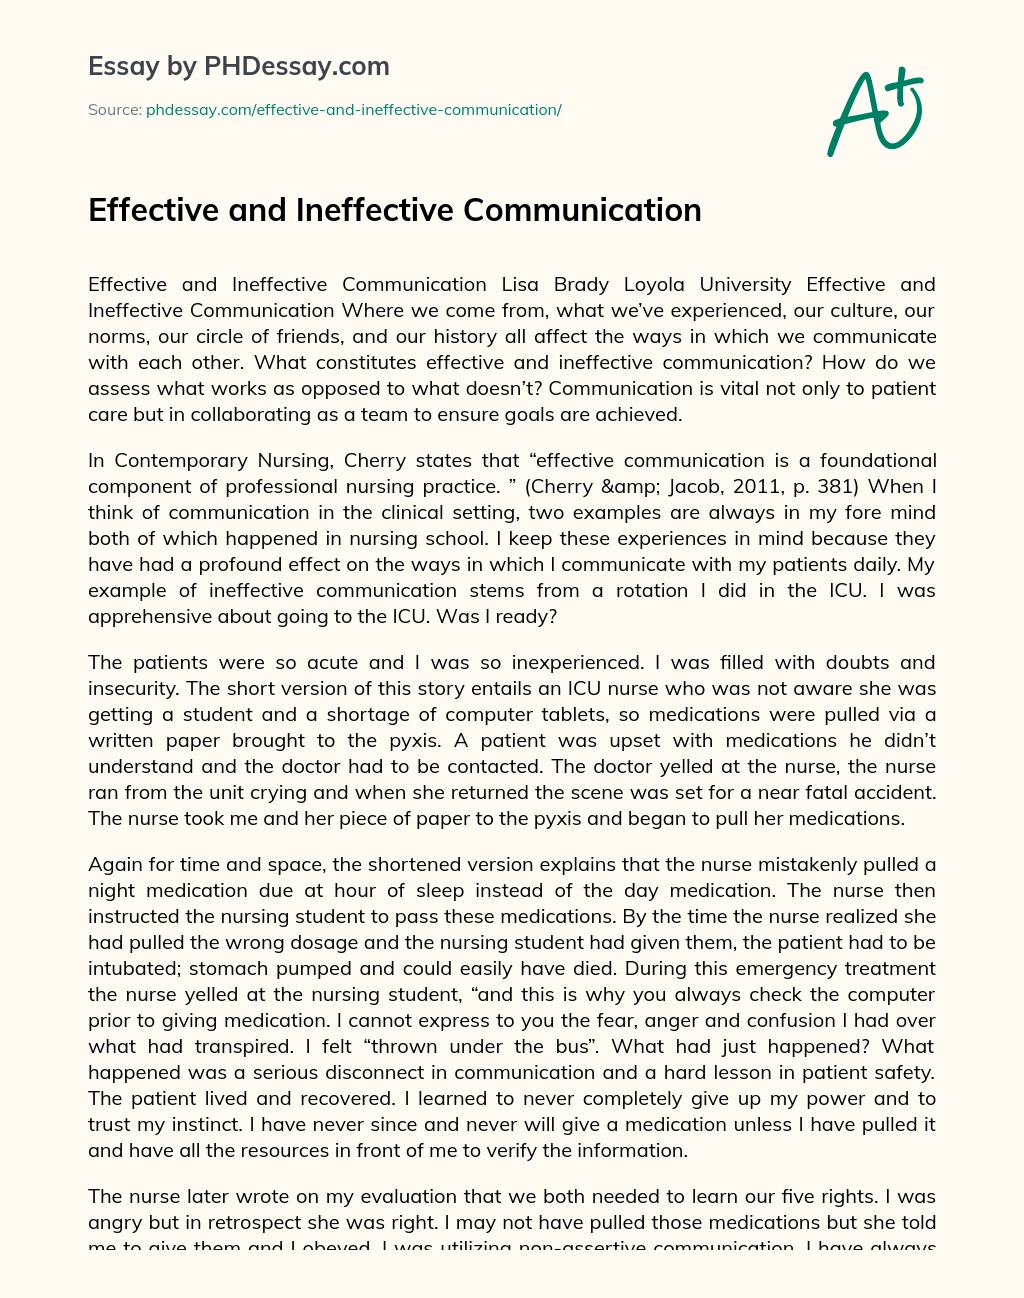 Effective and Ineffective Communication essay